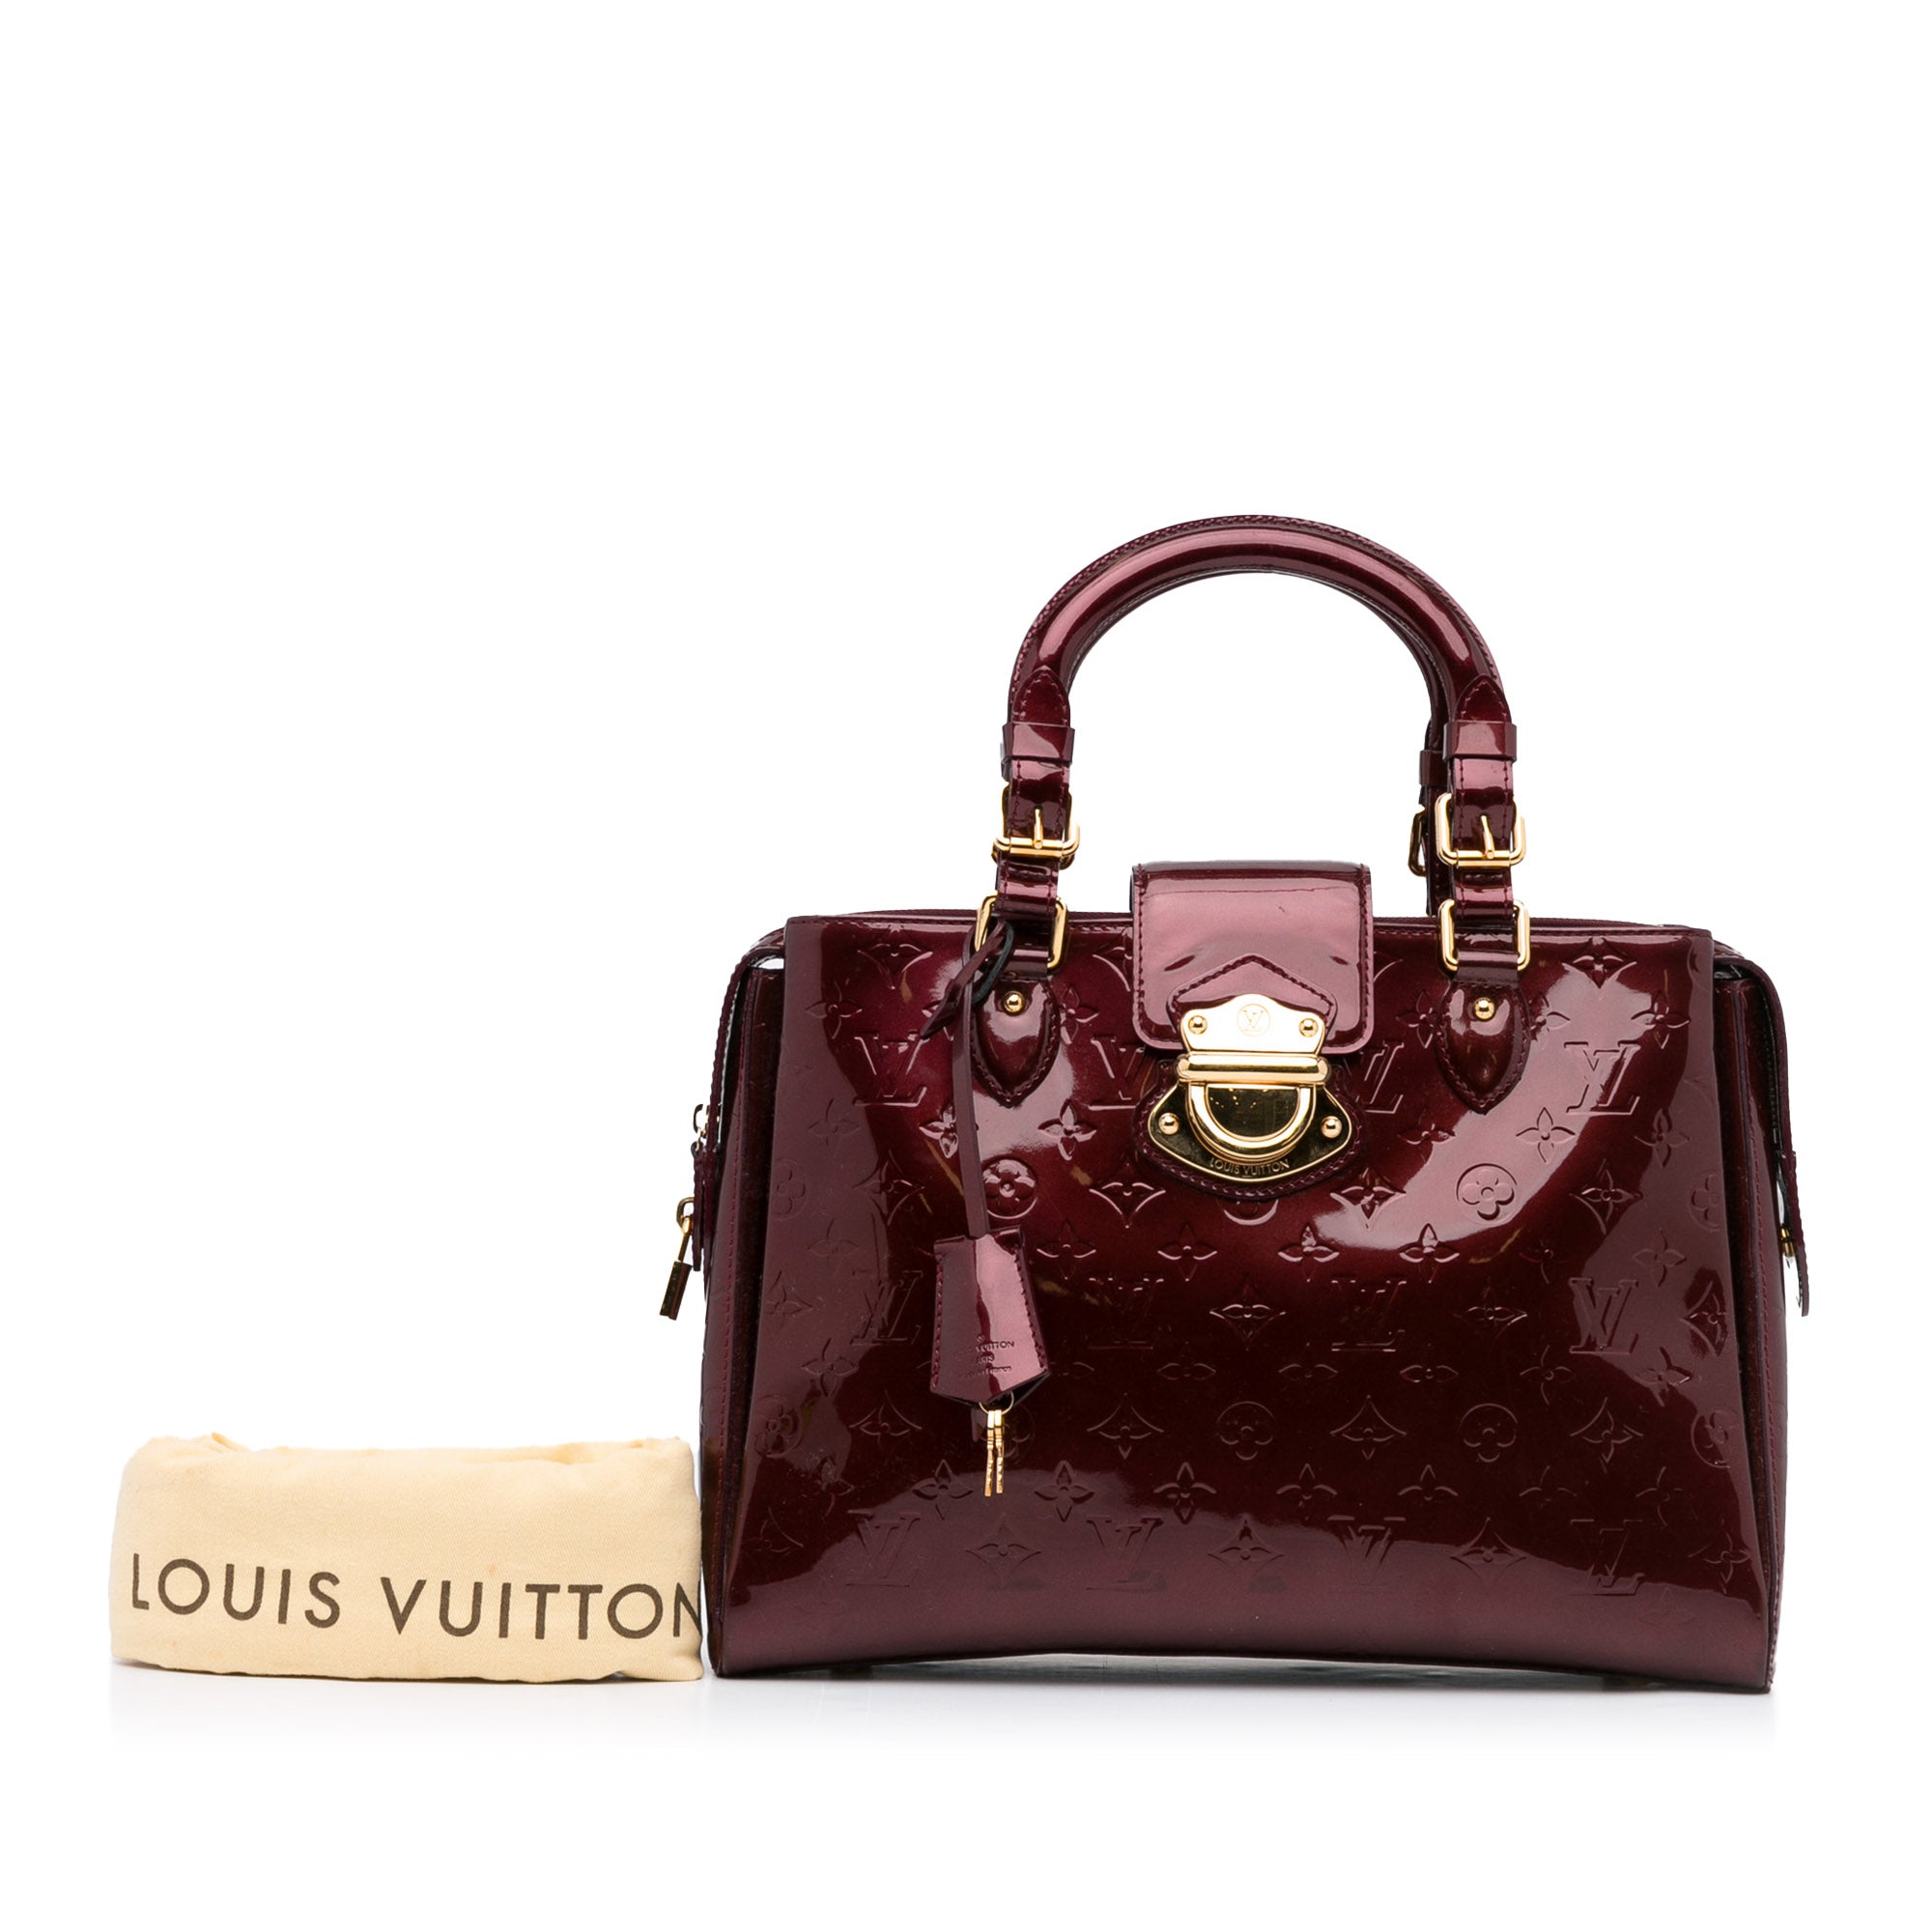 LOUIS VUITTON Melrose Ave Vernis Leather Monogram in United States